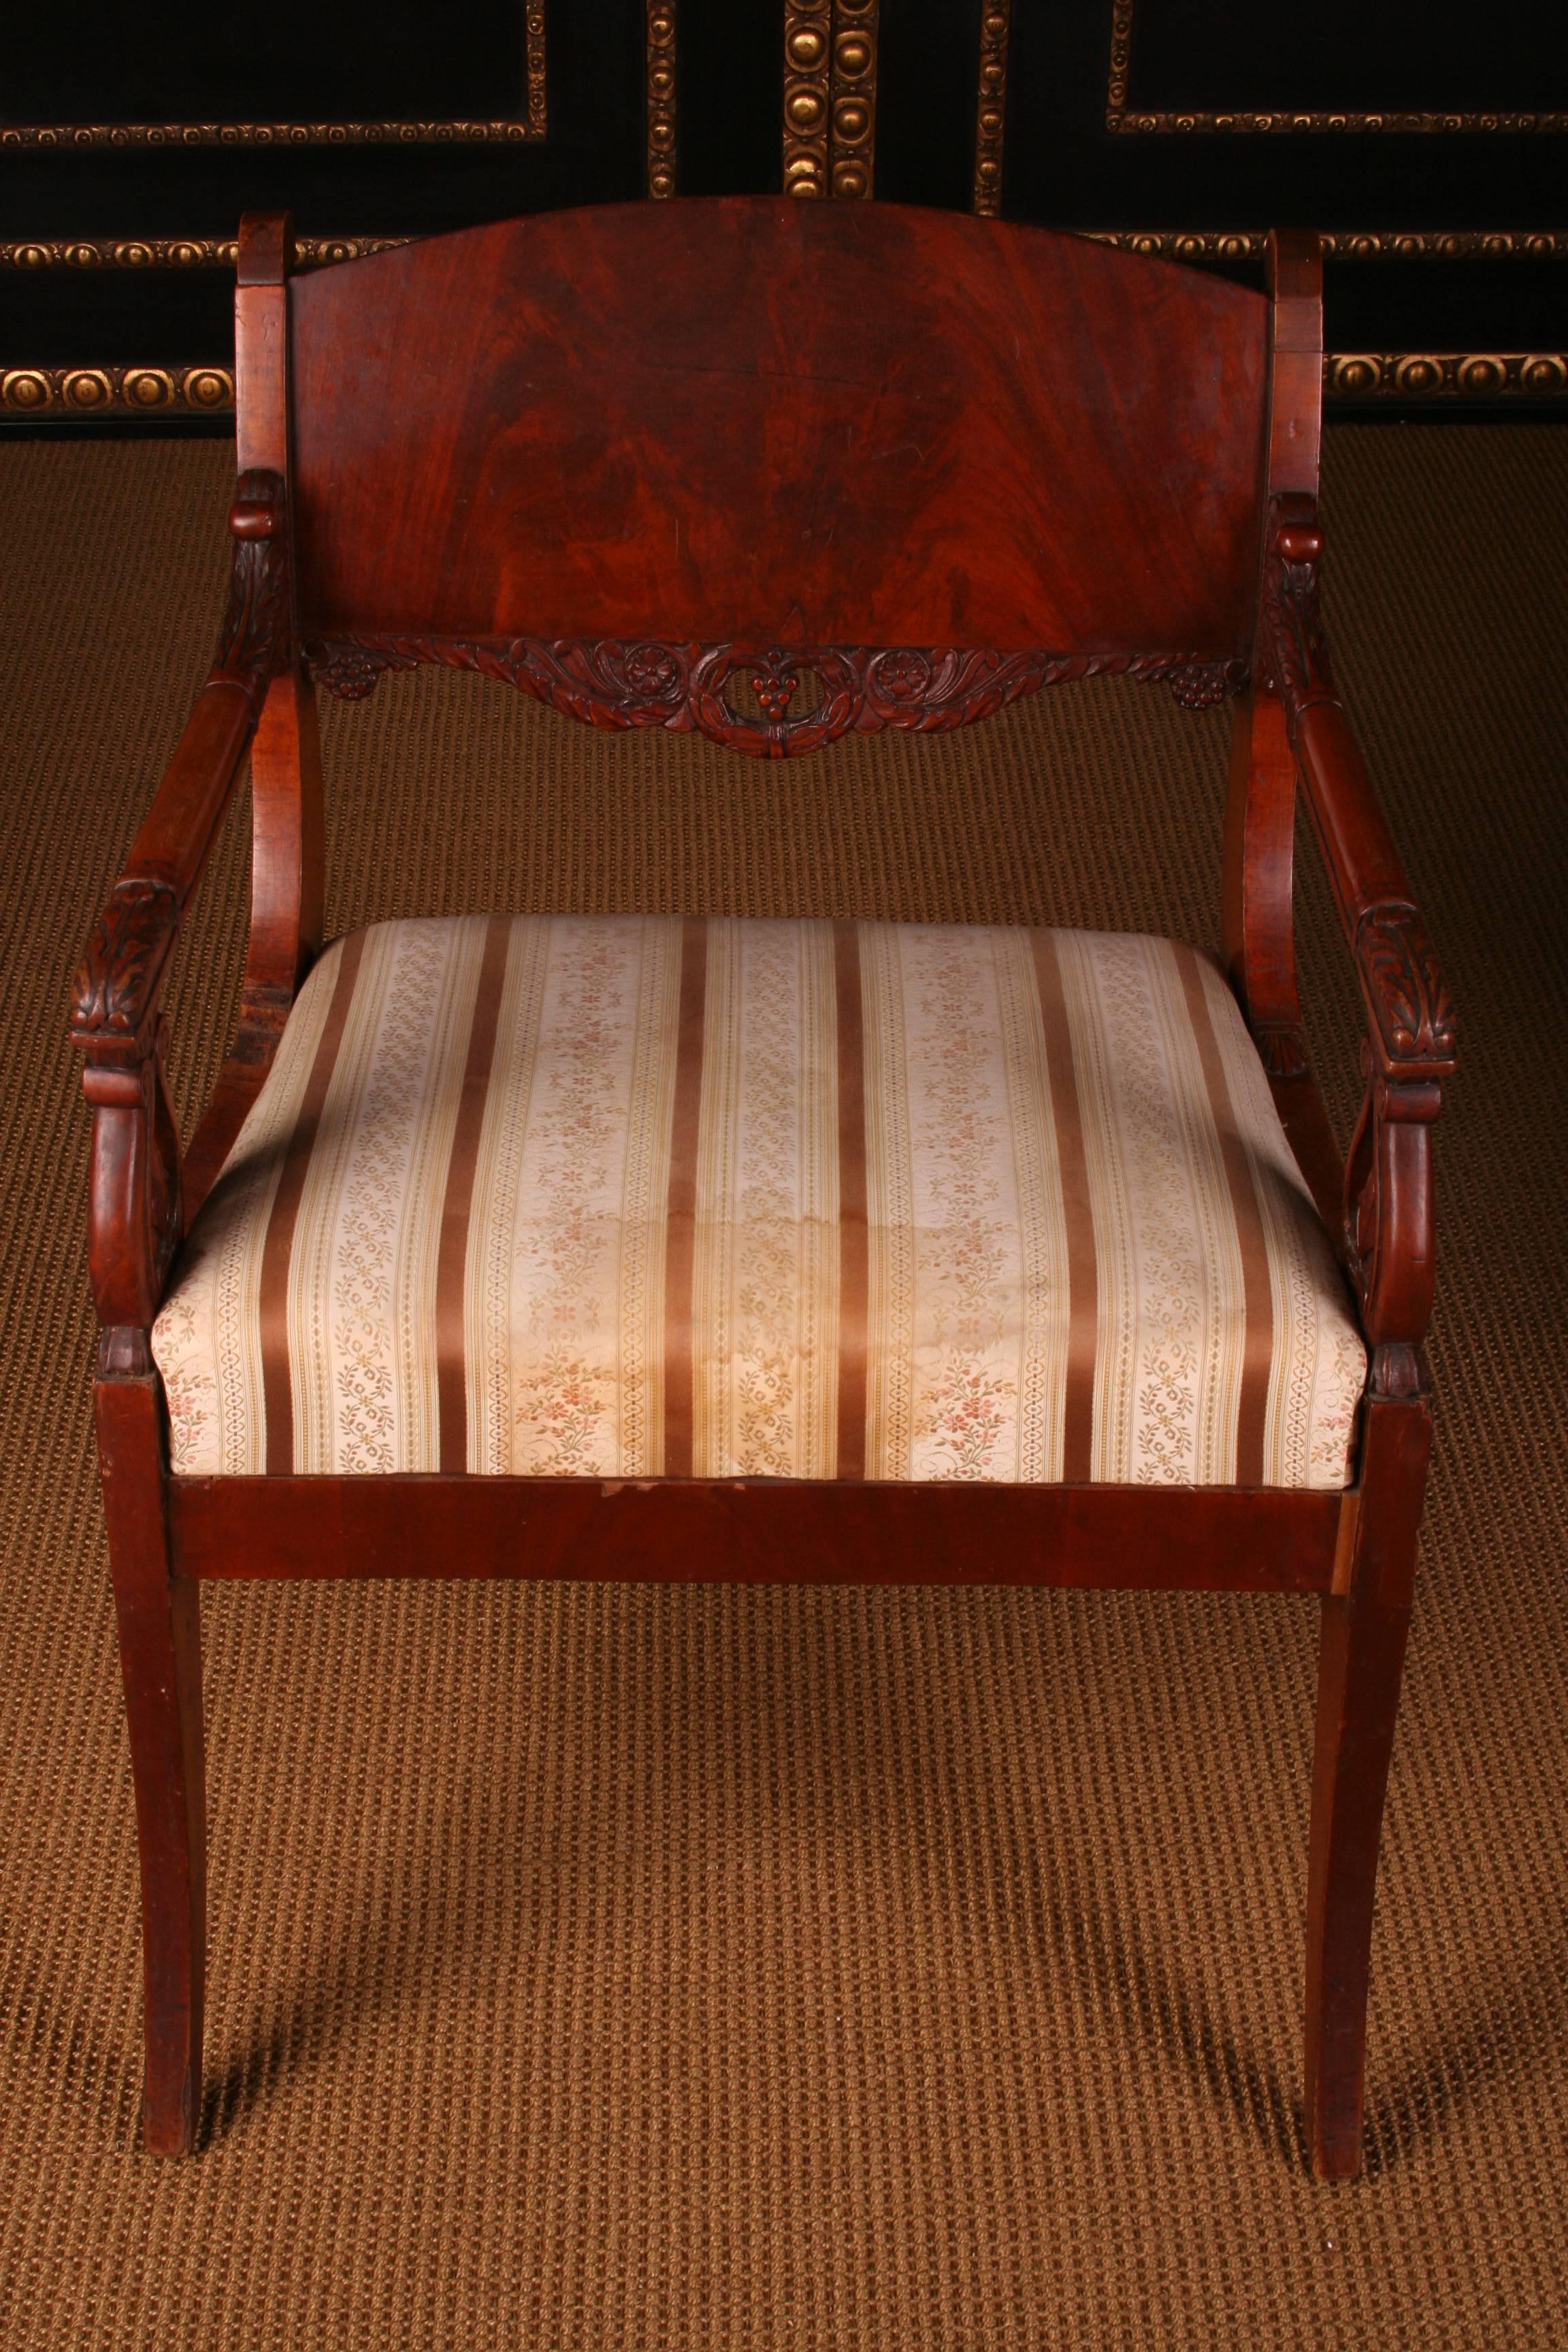 Solid mahogany. Straight frame on saber-shaped legs with laid sheet. Strongly curved supports for slightly rising armrests. High-profile, contoured backrest frame with a wide finish.

(C-51).